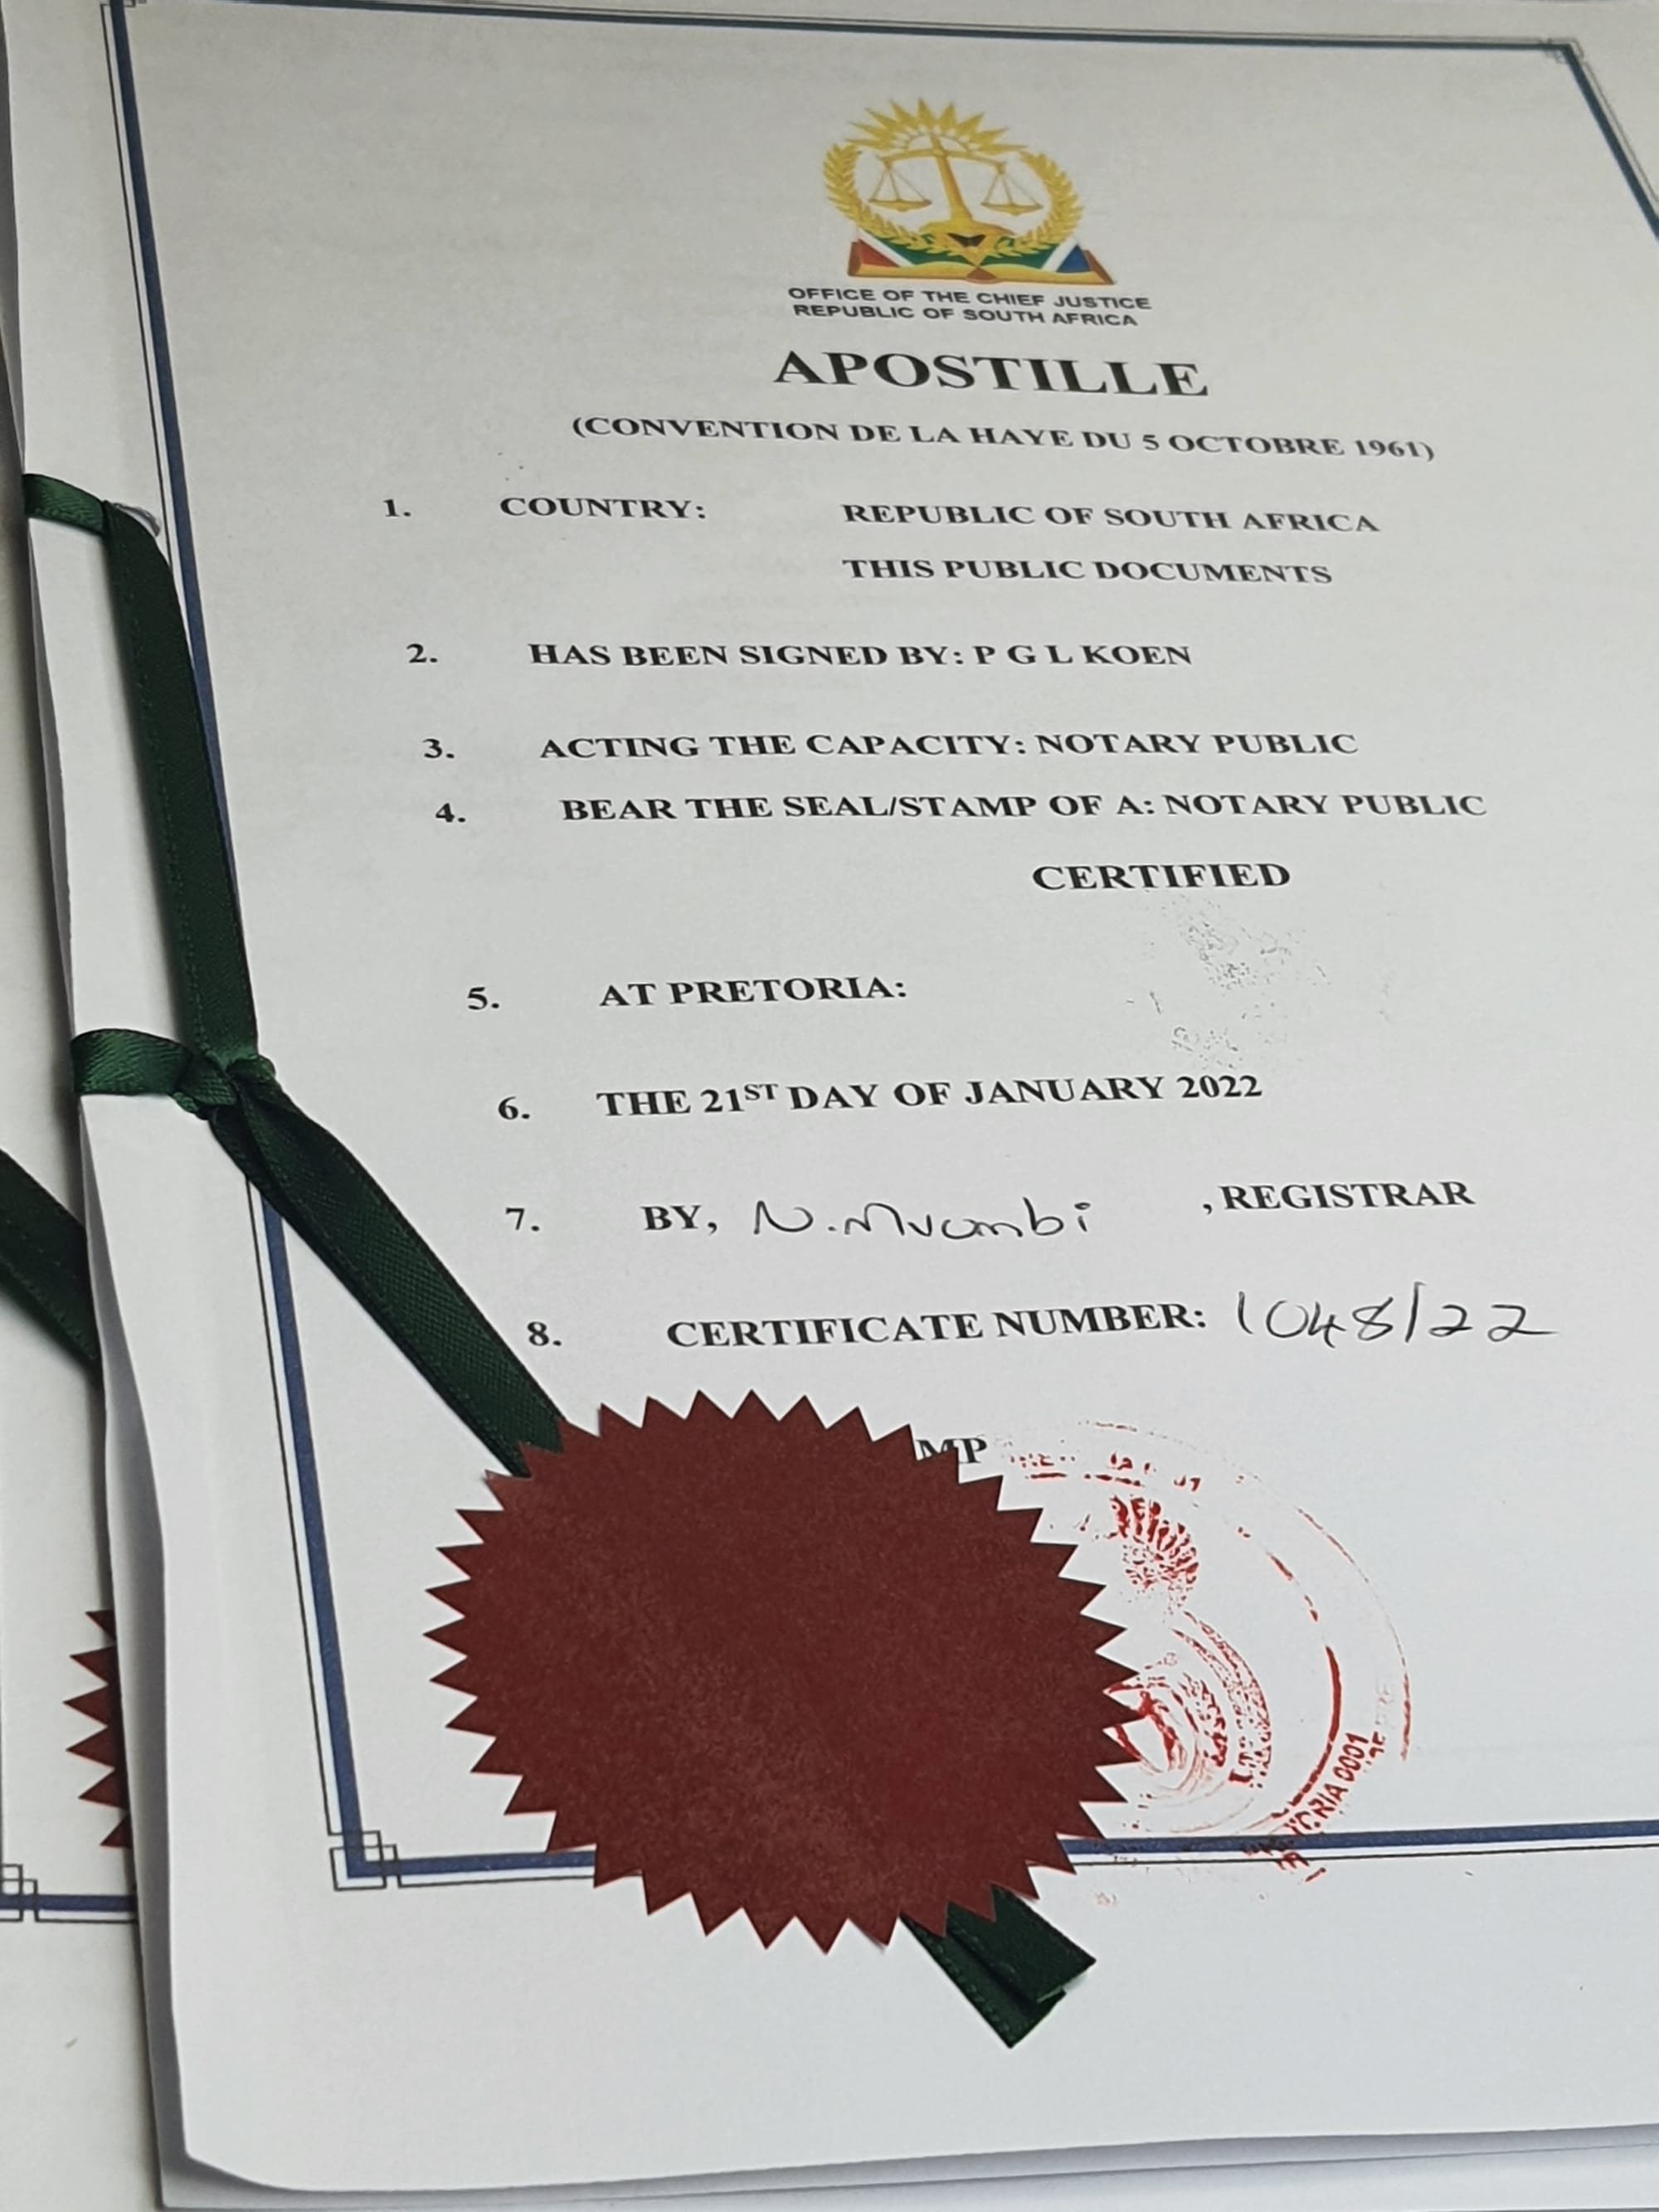 What does Apostille mean?